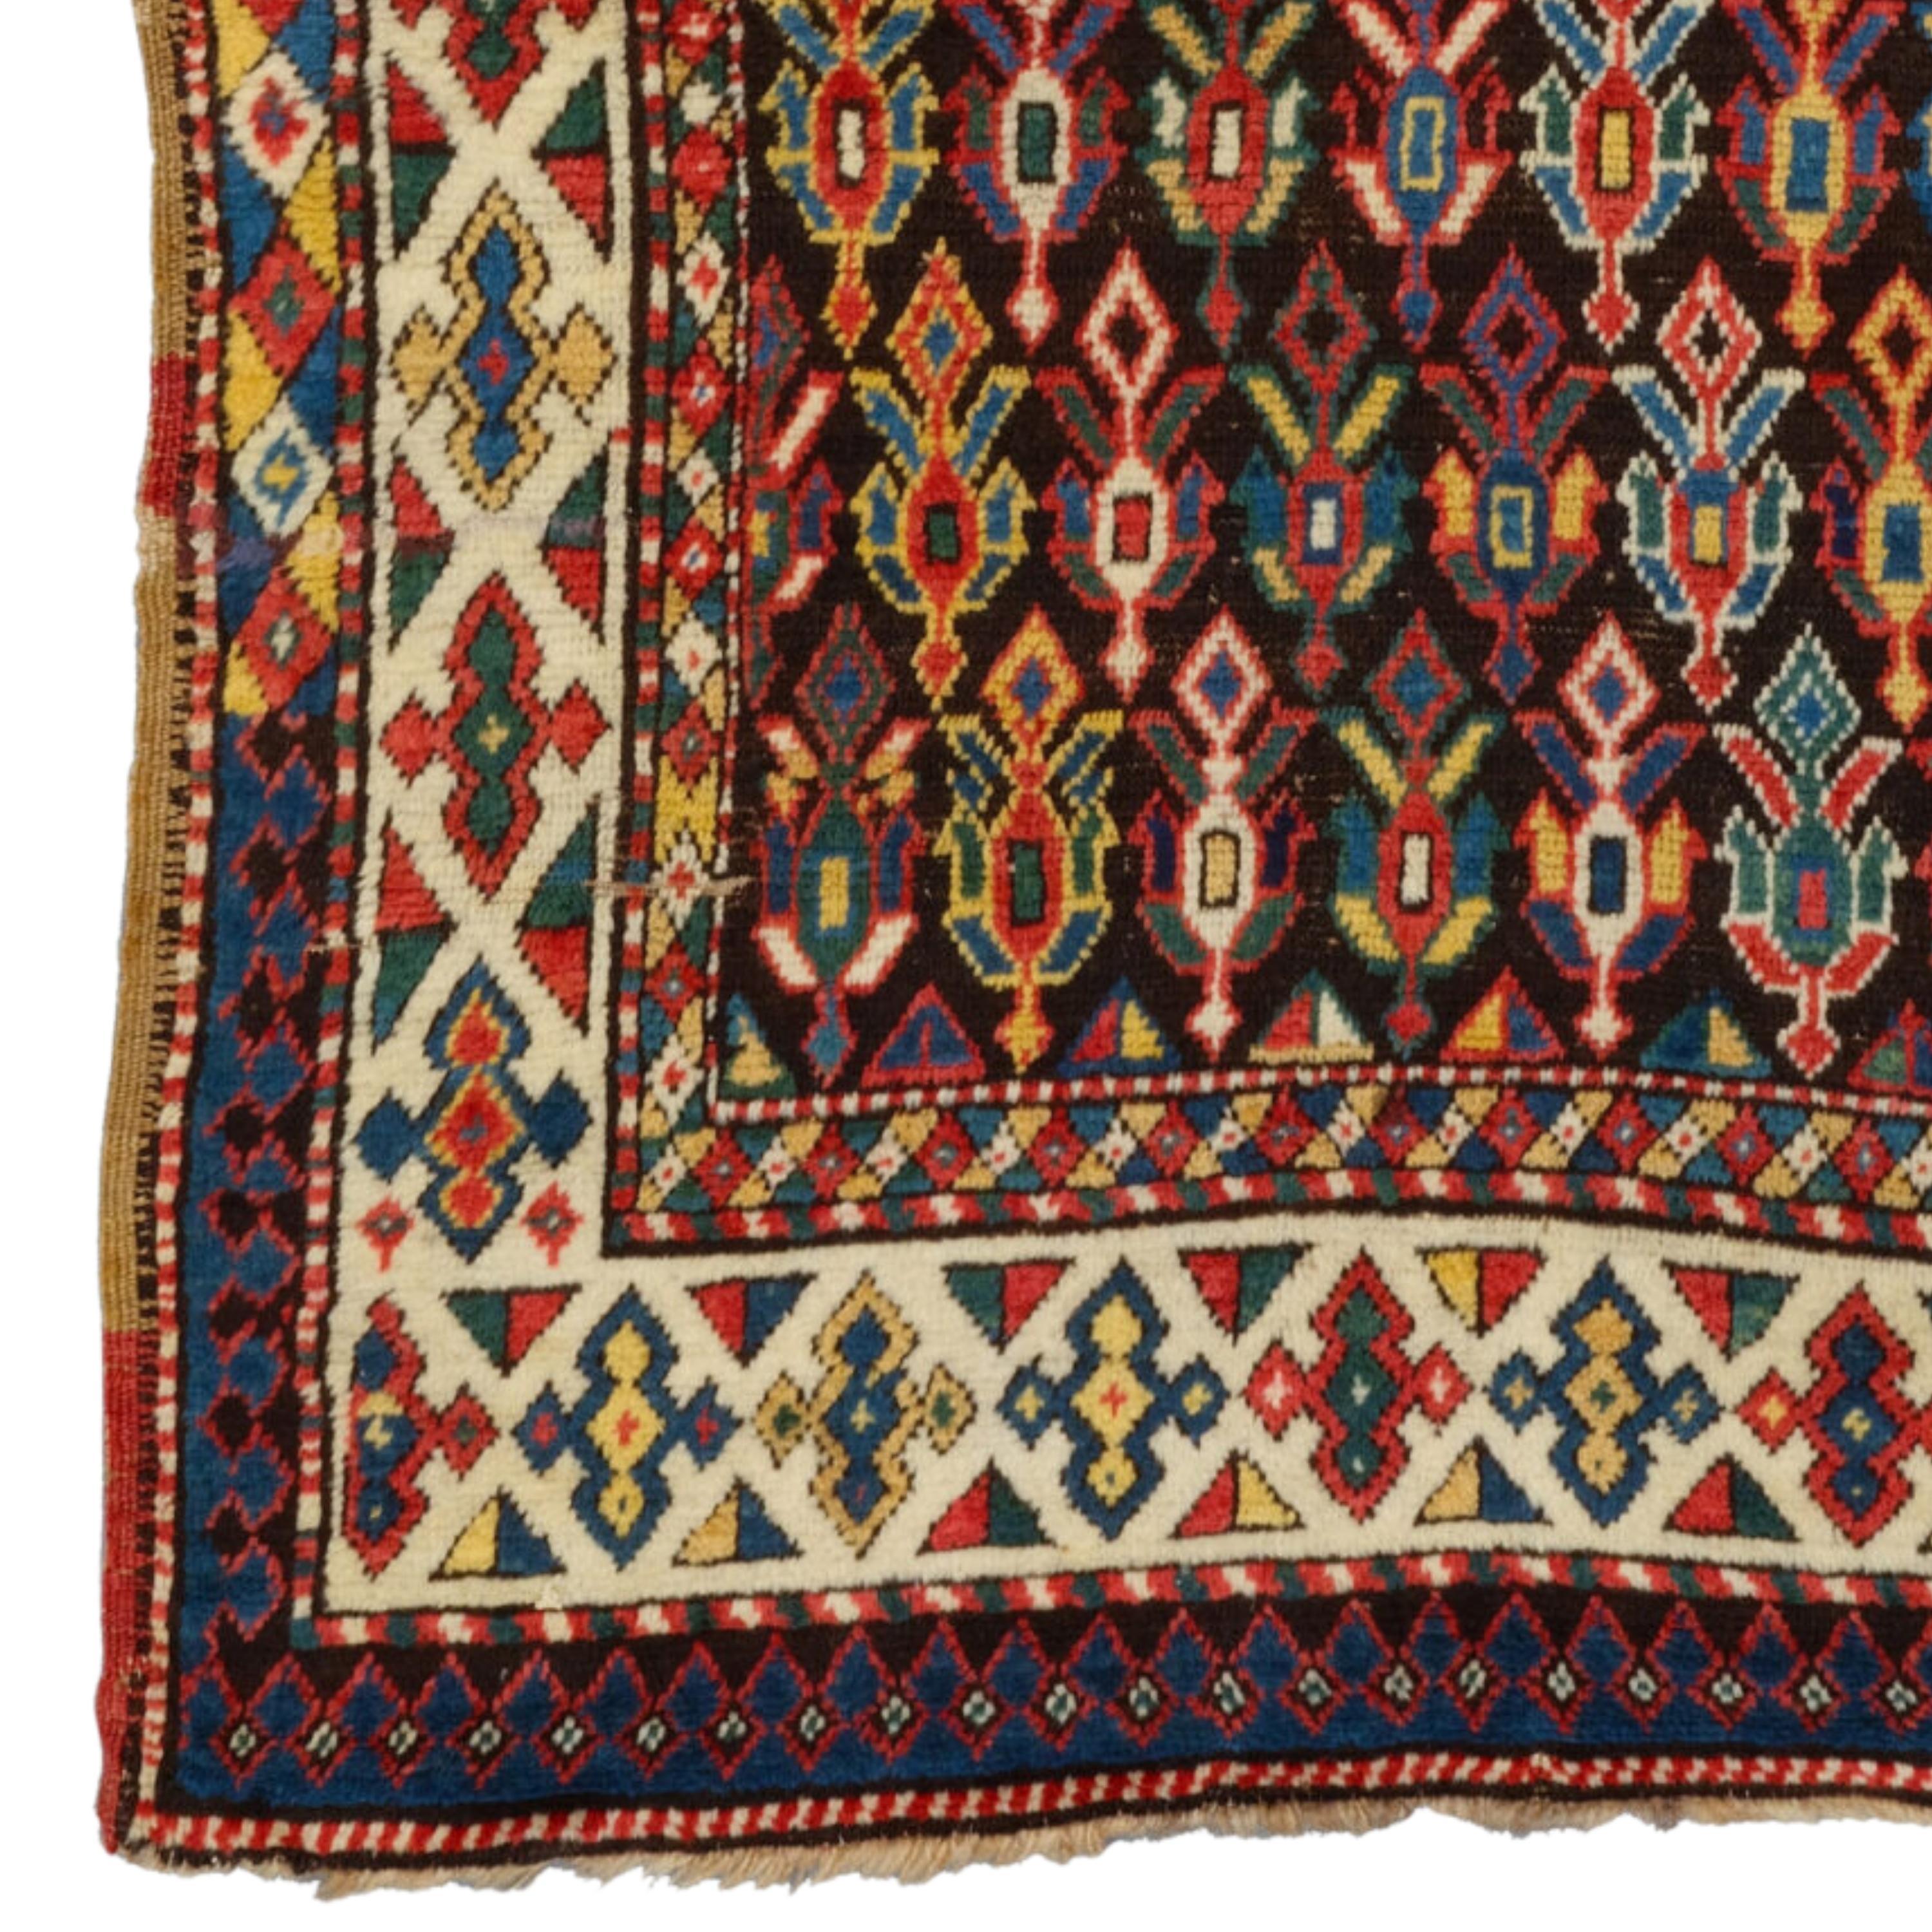 Antique Caucasian Rug - Late Of The 19th Century Caucasian Rug. in Good Condition. Size 107 x 220 (3,51 - 7,21 ft)

If you want to add a historical touch to your home or office, this late 19th-century Caucasian rug is for you. This carpet dazzles